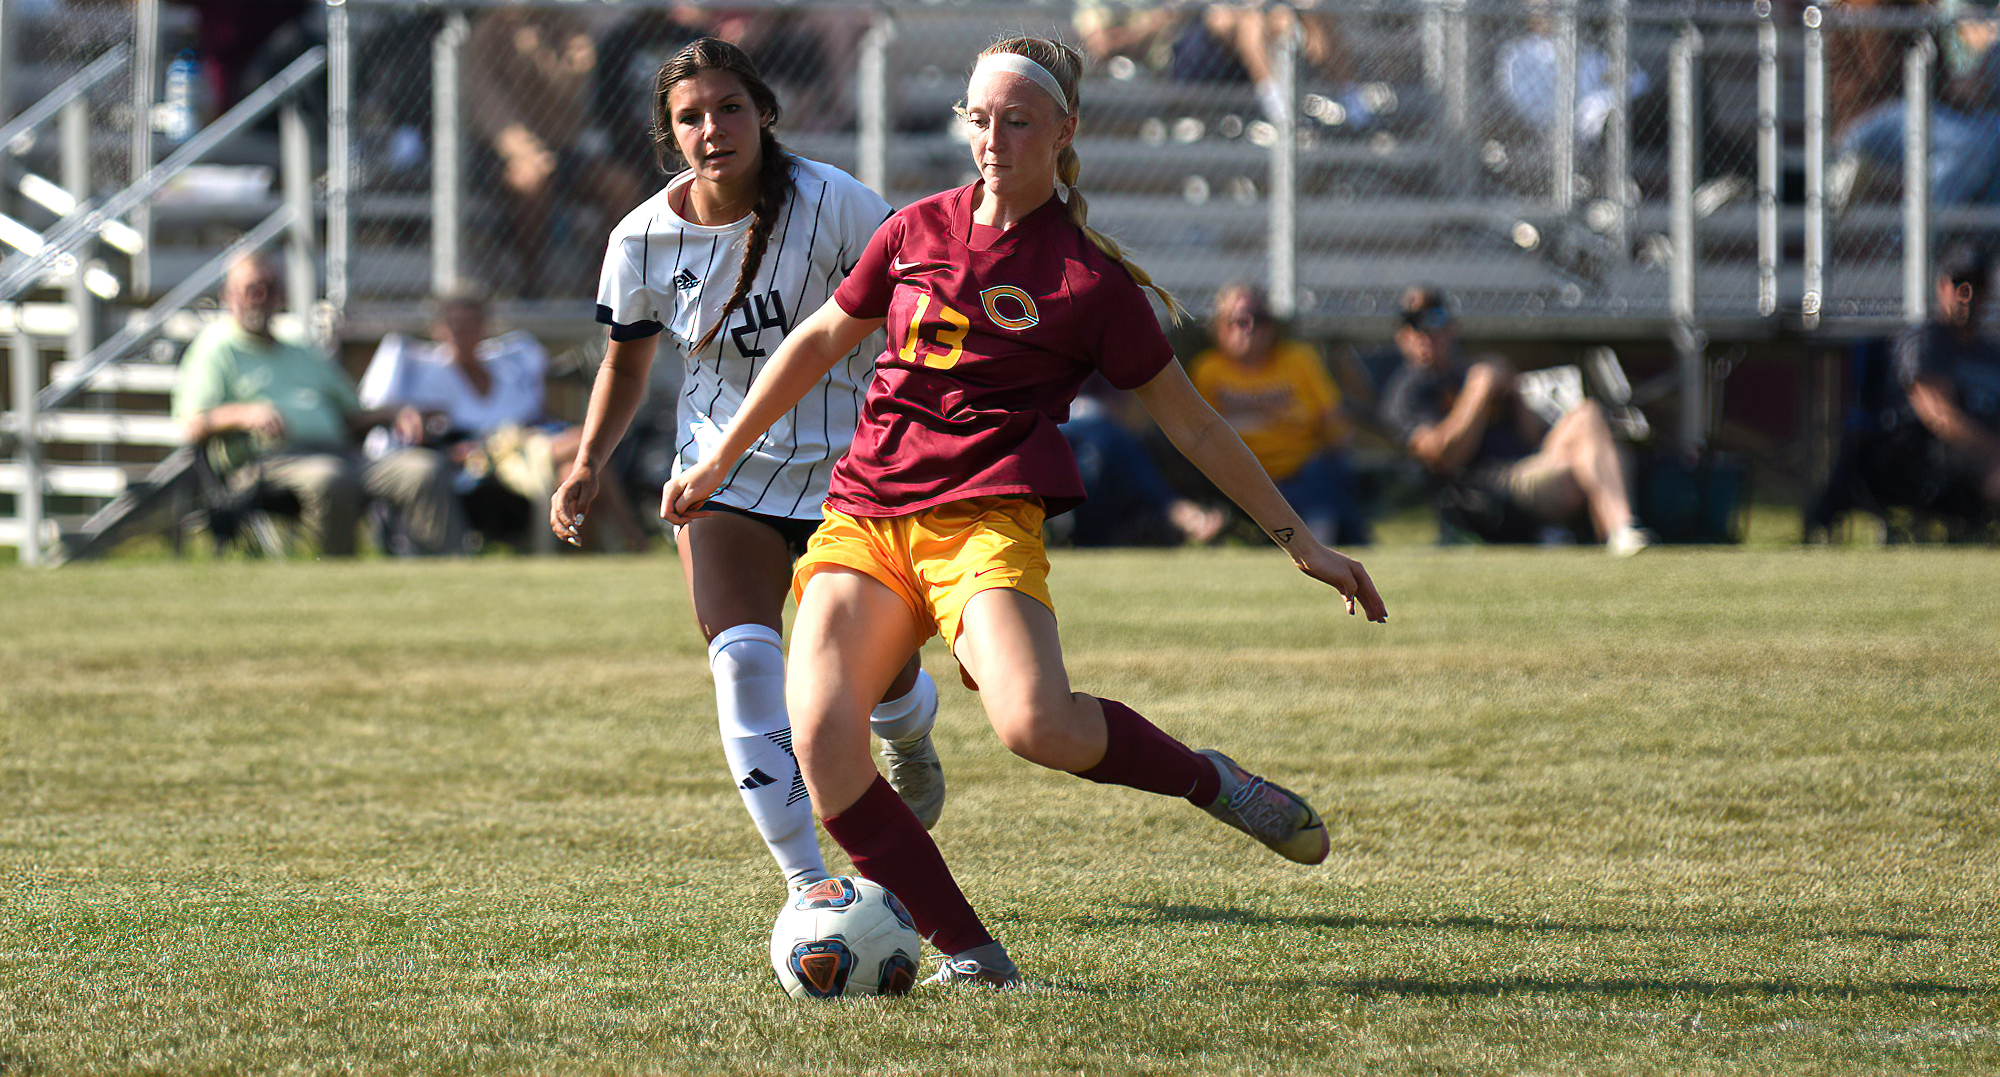 Freshman Emma Sheflo scored both goals in the Cobbers' 2-1 win at Dakota Wesleyan. She leads the team in goals and points this year.